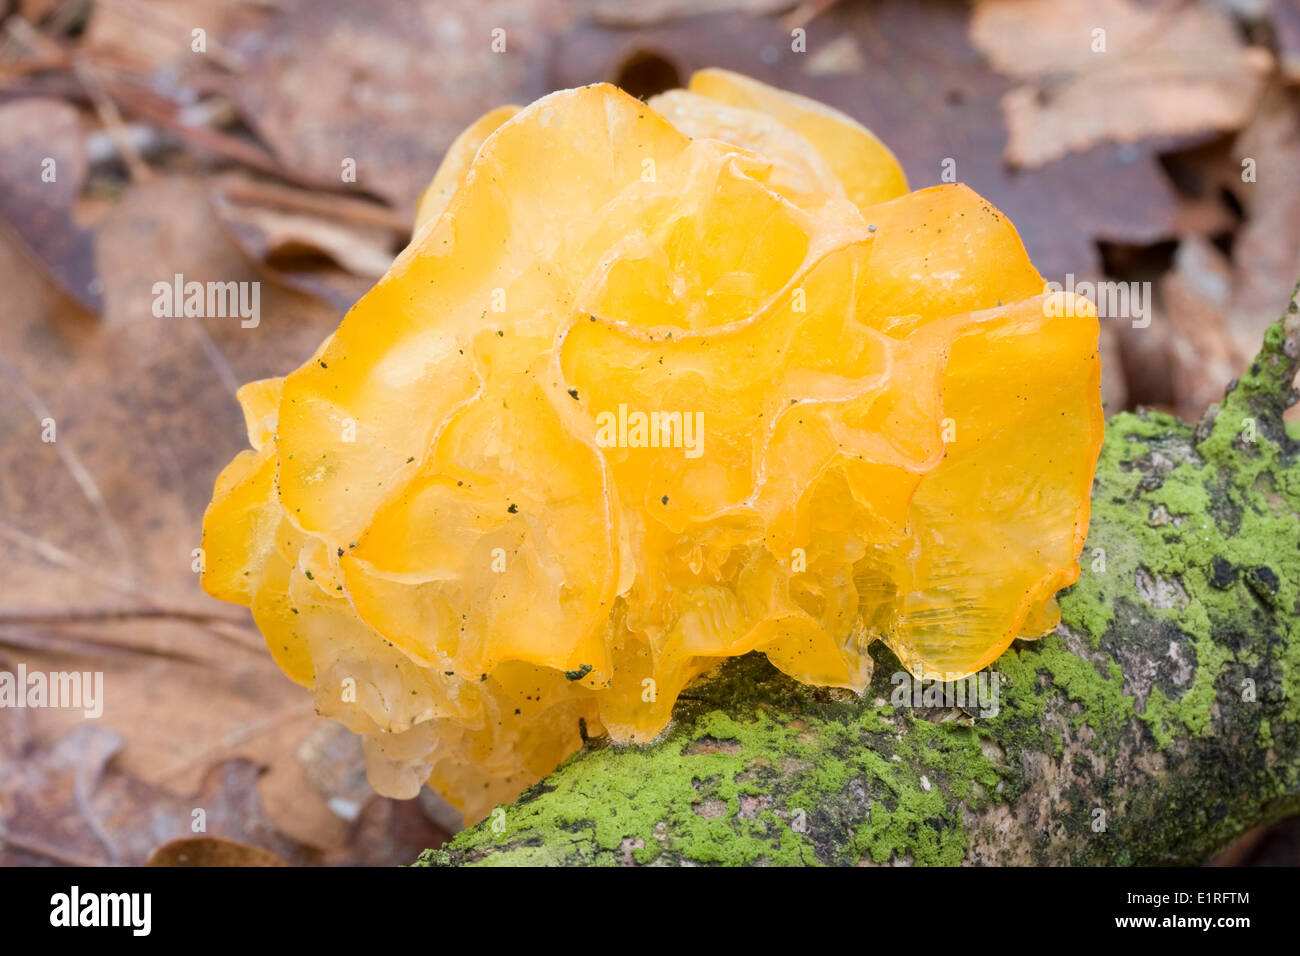 A large frozen fruiting body of Witch's Butter on a branch covered in green mosses with brown fallen oak leaves in the background. Stock Photo